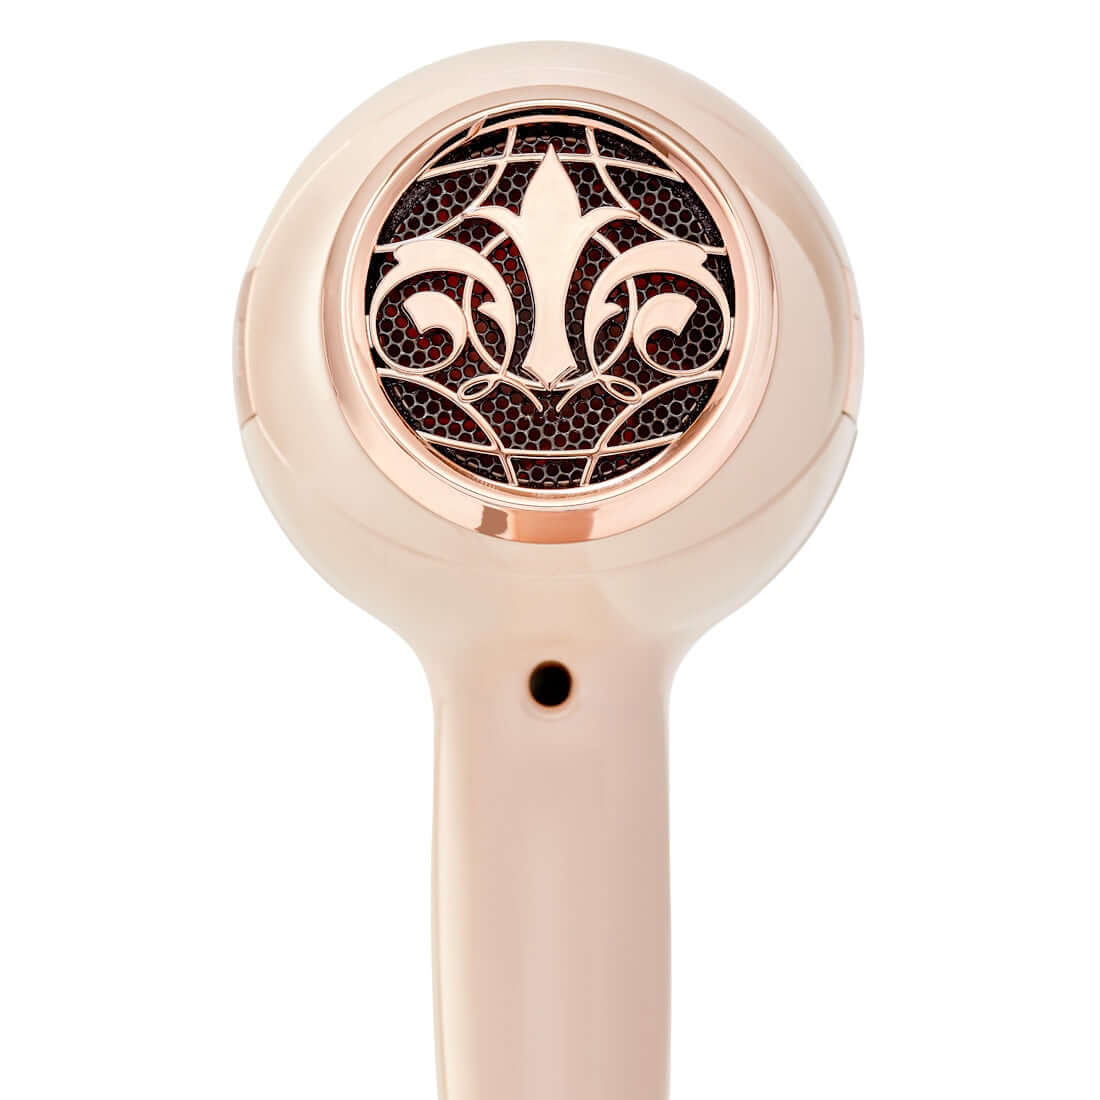 Rear of TYME BlowTYME Hair Dryer with rose gold fleur de lis logo cover for the brushless motor.